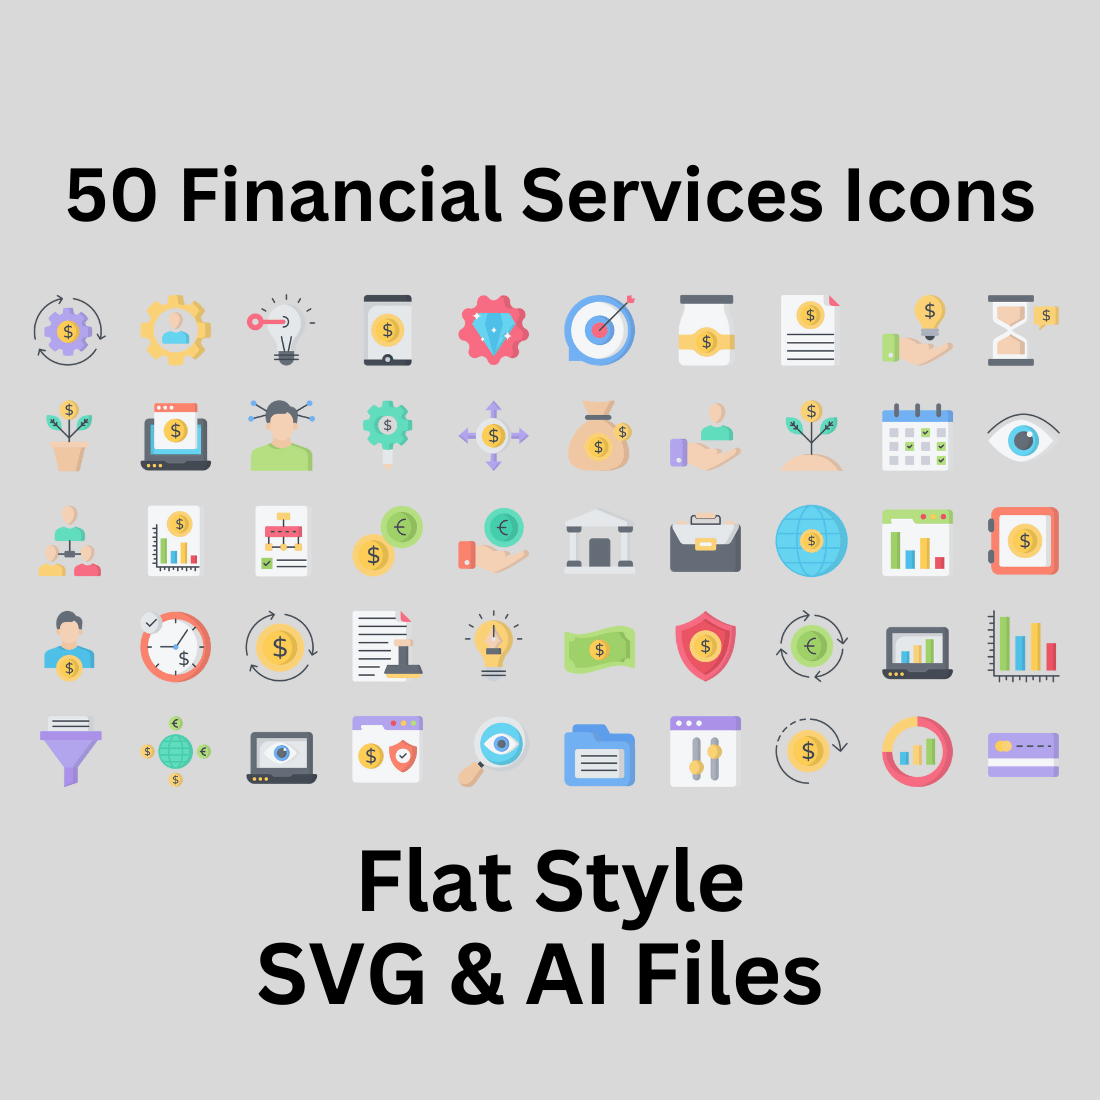 Financial Services Icon Set 50 Flat Icons - SVG And AI Files preview image.